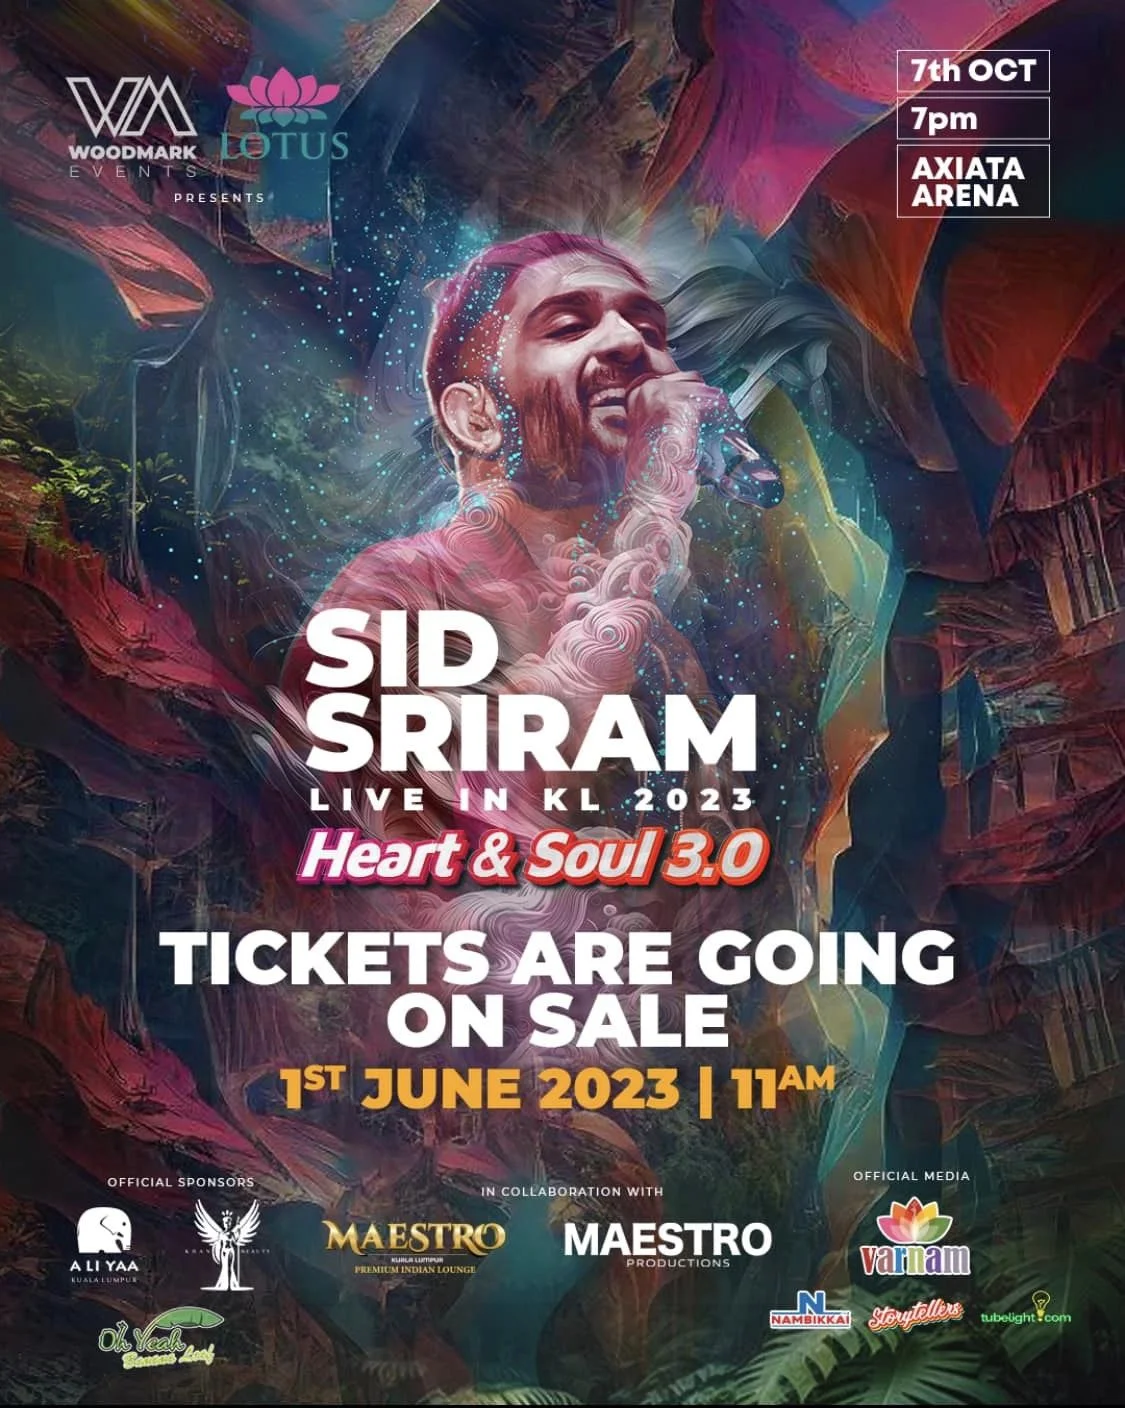 Sid Sriram’s Heart and Soul 3.0 concert to hit KL this 7th October